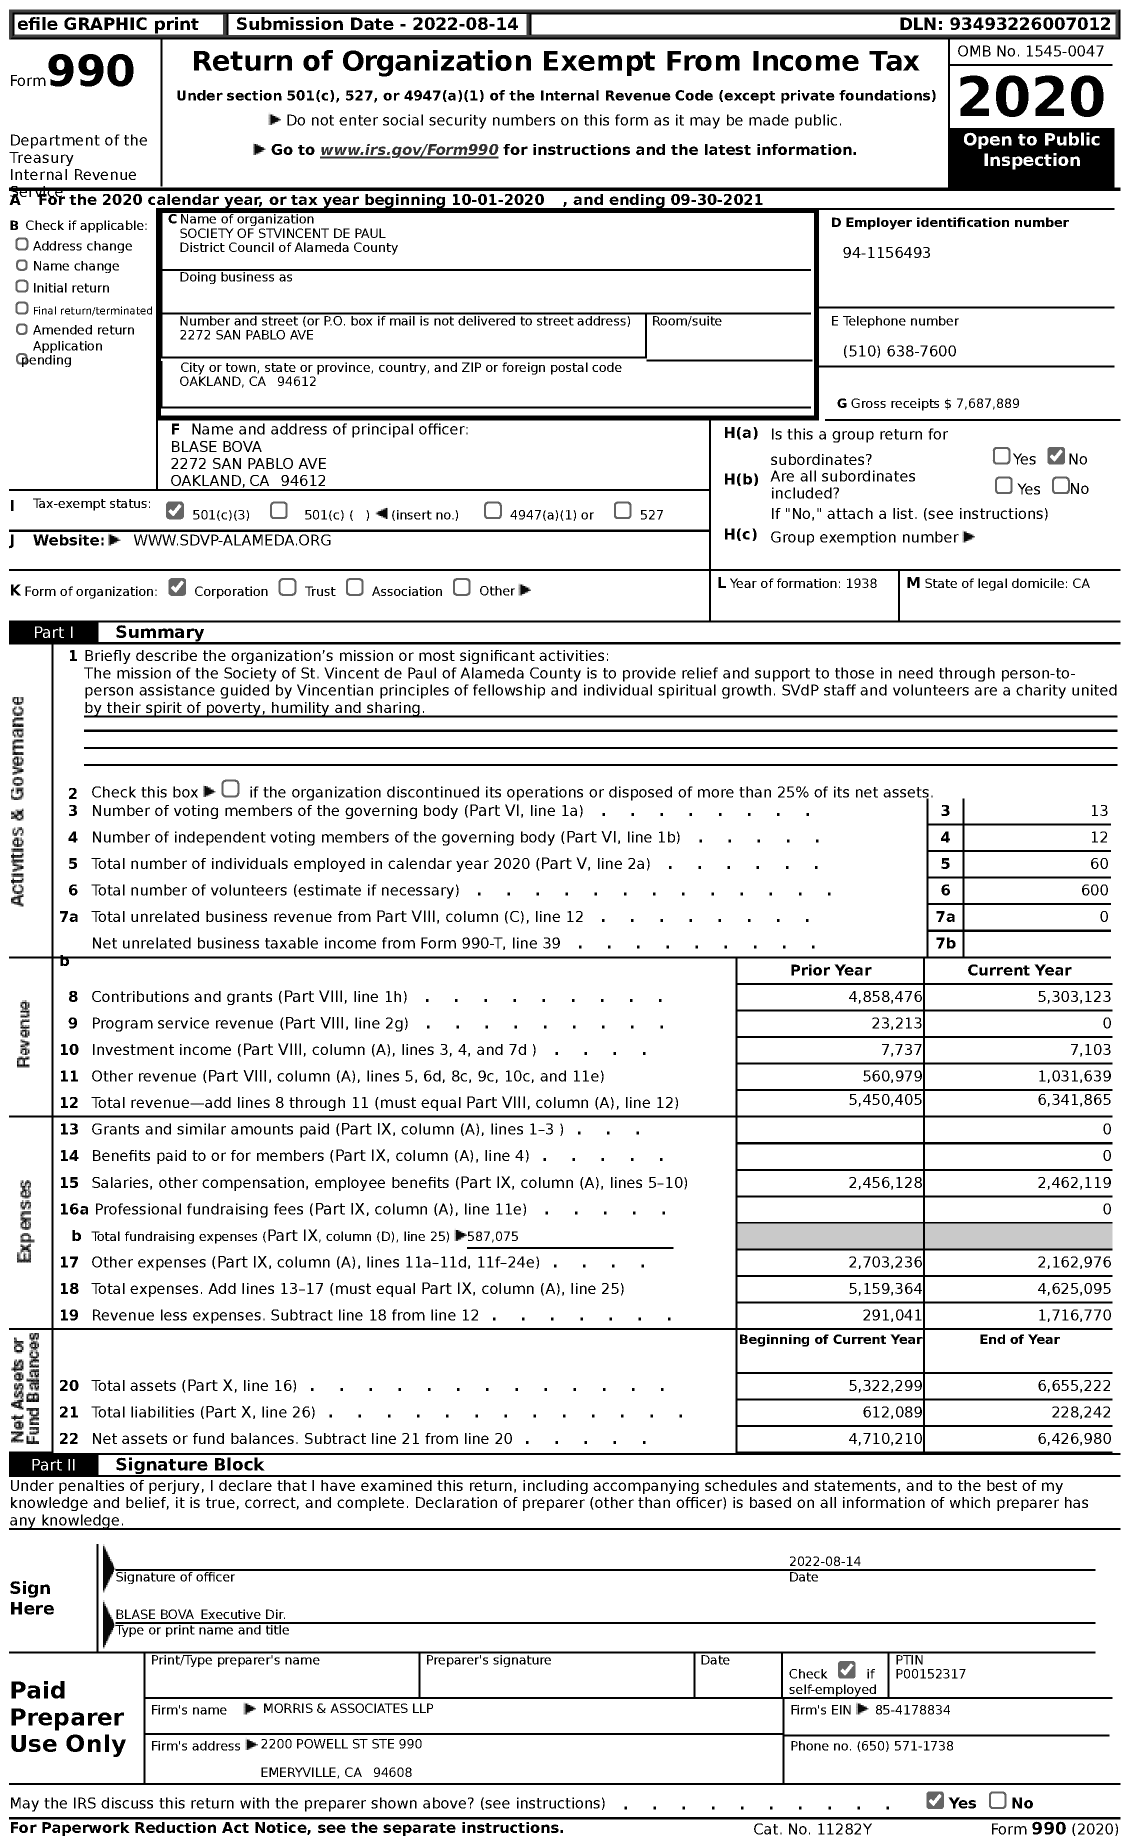 Image of first page of 2020 Form 990 for SOCIETY of STVINCENT de PAUL District Council of Alameda County